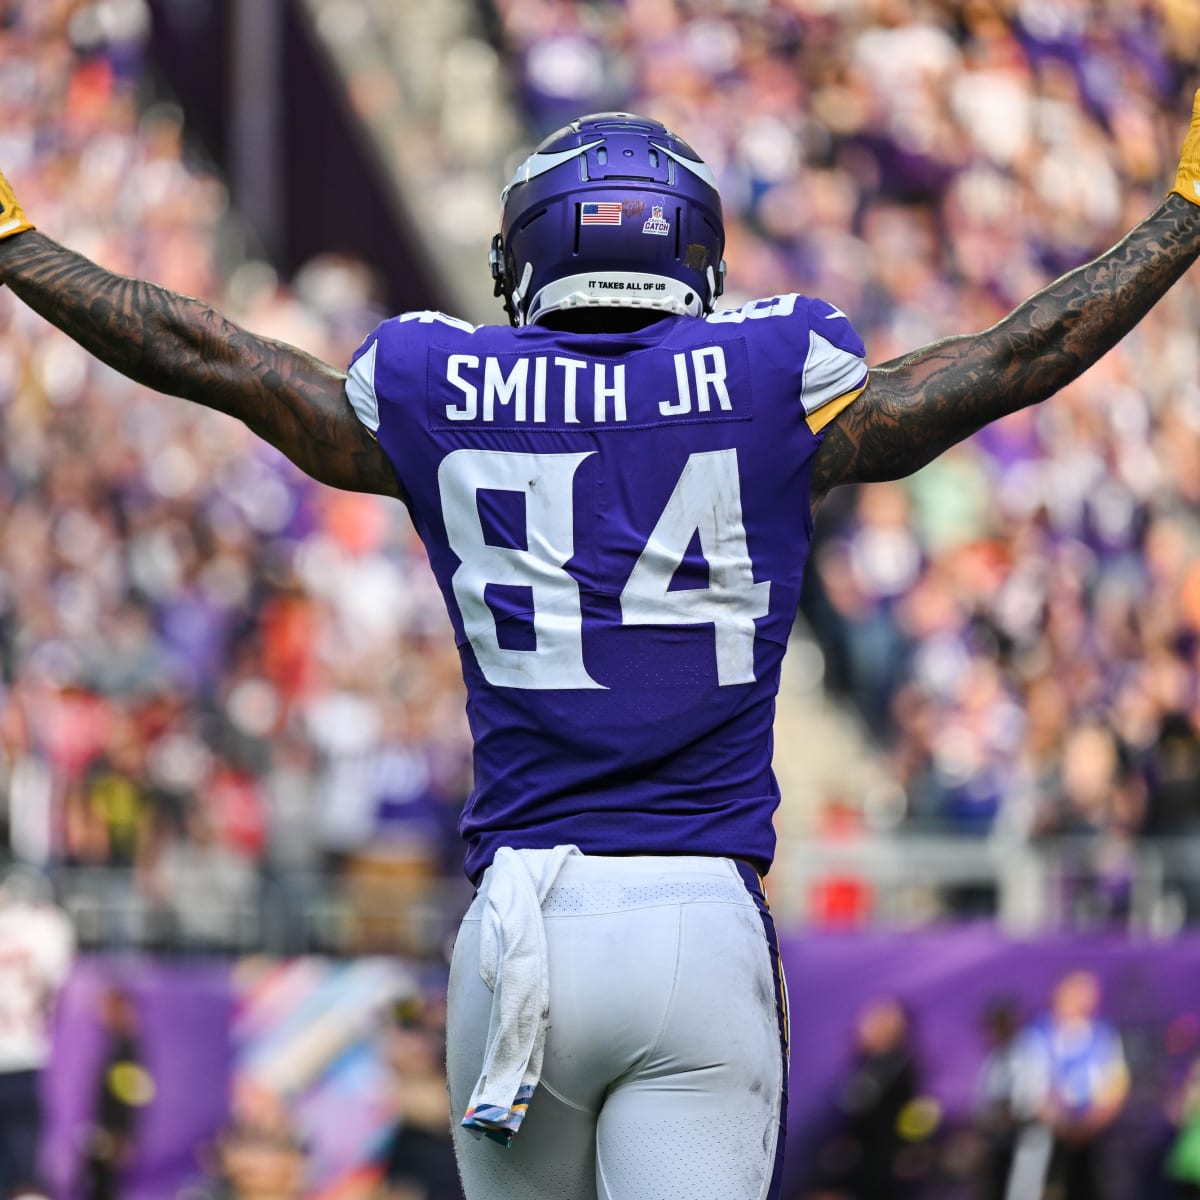 Irv Smith Jr. injury update: Vikings TE expected to be available